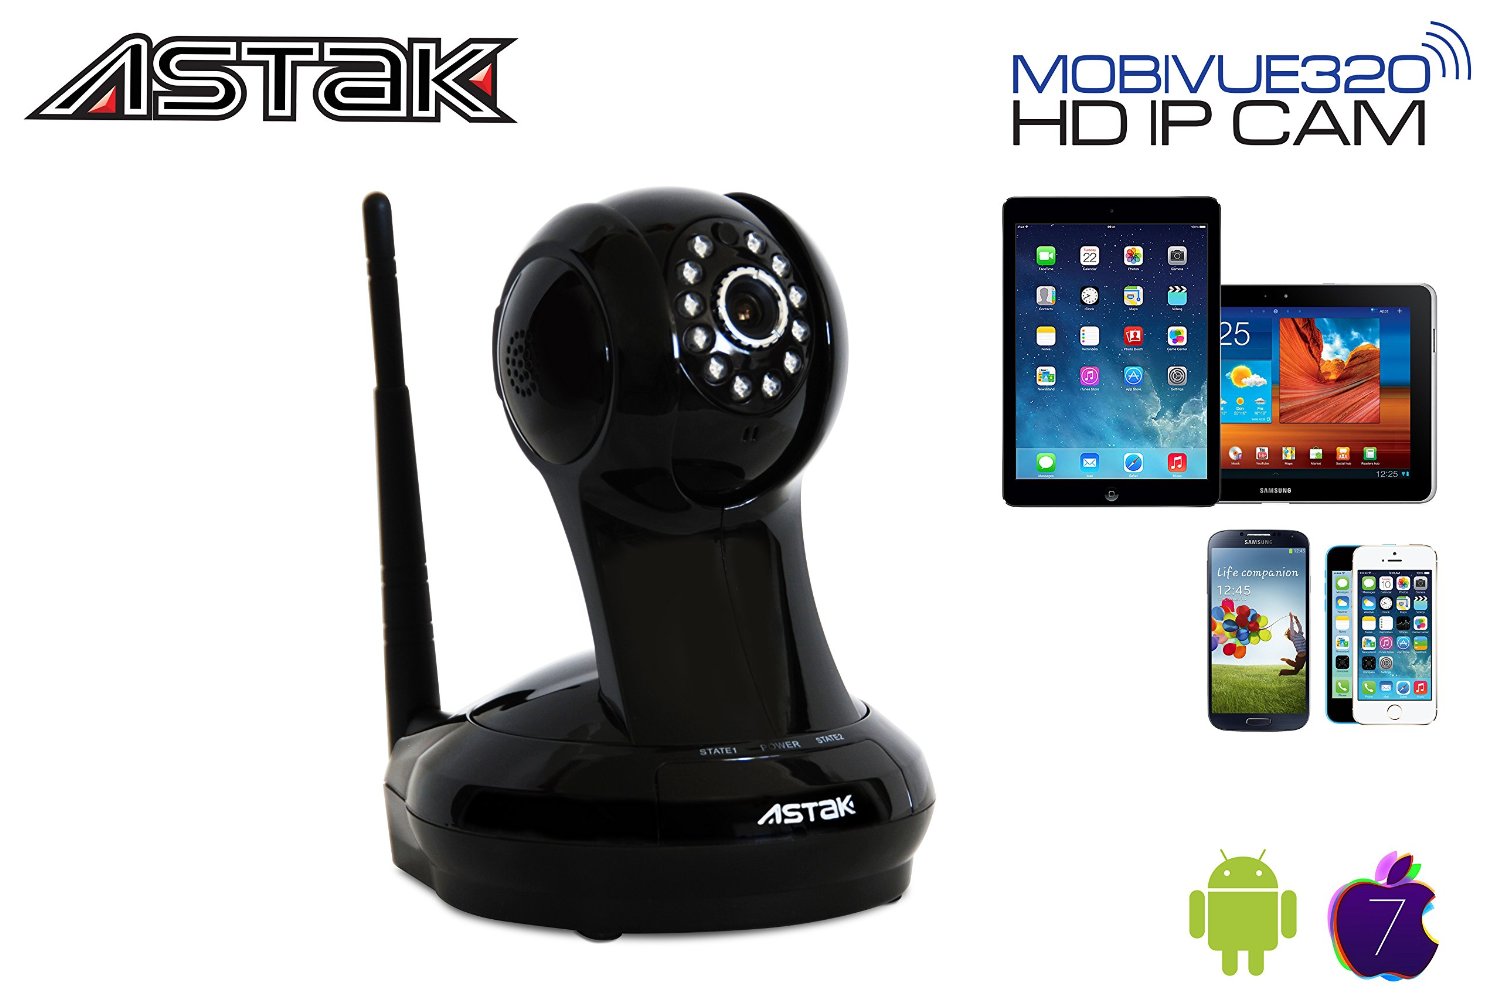 Astak® Mobivue 320 Megapixel HD 1280 x 720p H.264 Wireless Pan Tilt IP Network Cloud Base Camera with 2 Way Audio IR Night Vision Motion Detection Built In DVR